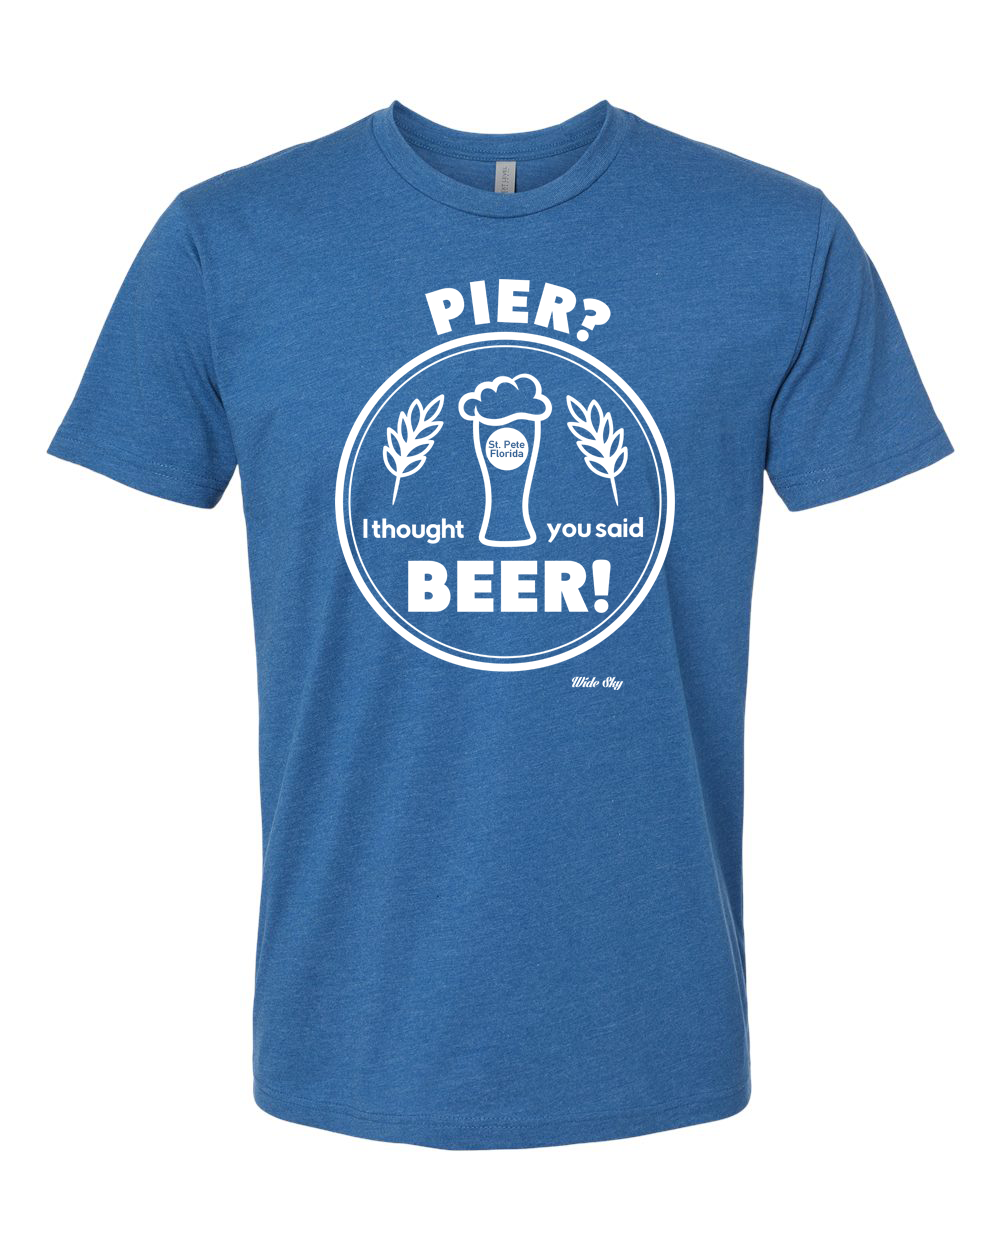 PIER? I thought you said BEER!